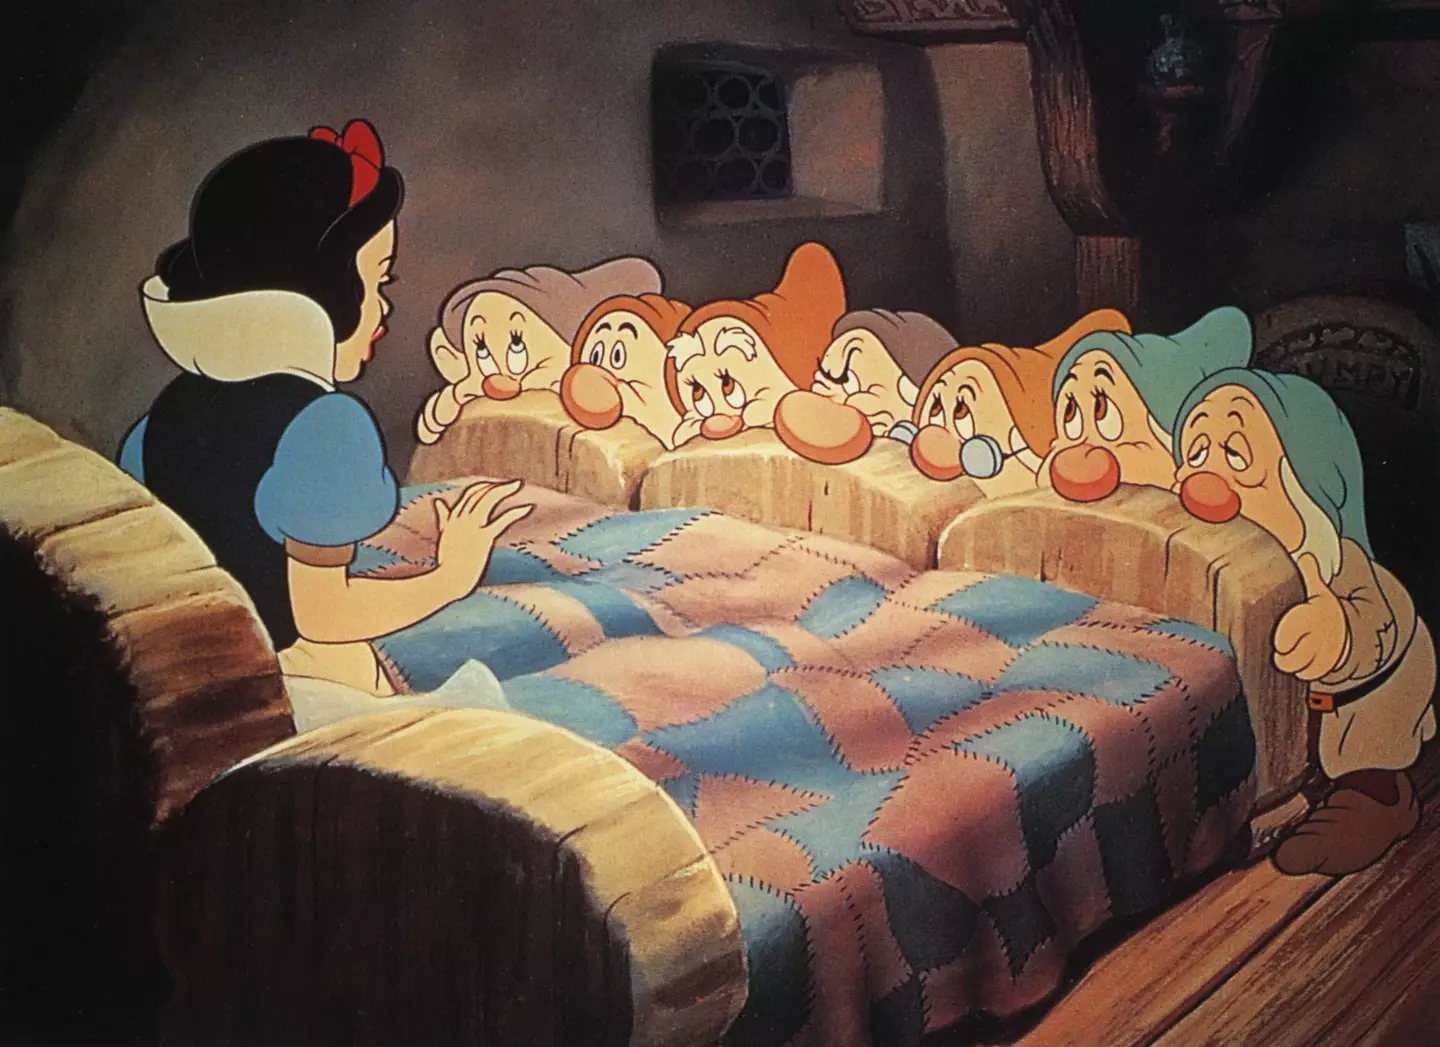 Leaked documents have revealed that Disney will be replacing the Seven Dwarfs in the remake of the classic 1937 film Snow White and the Seven Dwarfs.